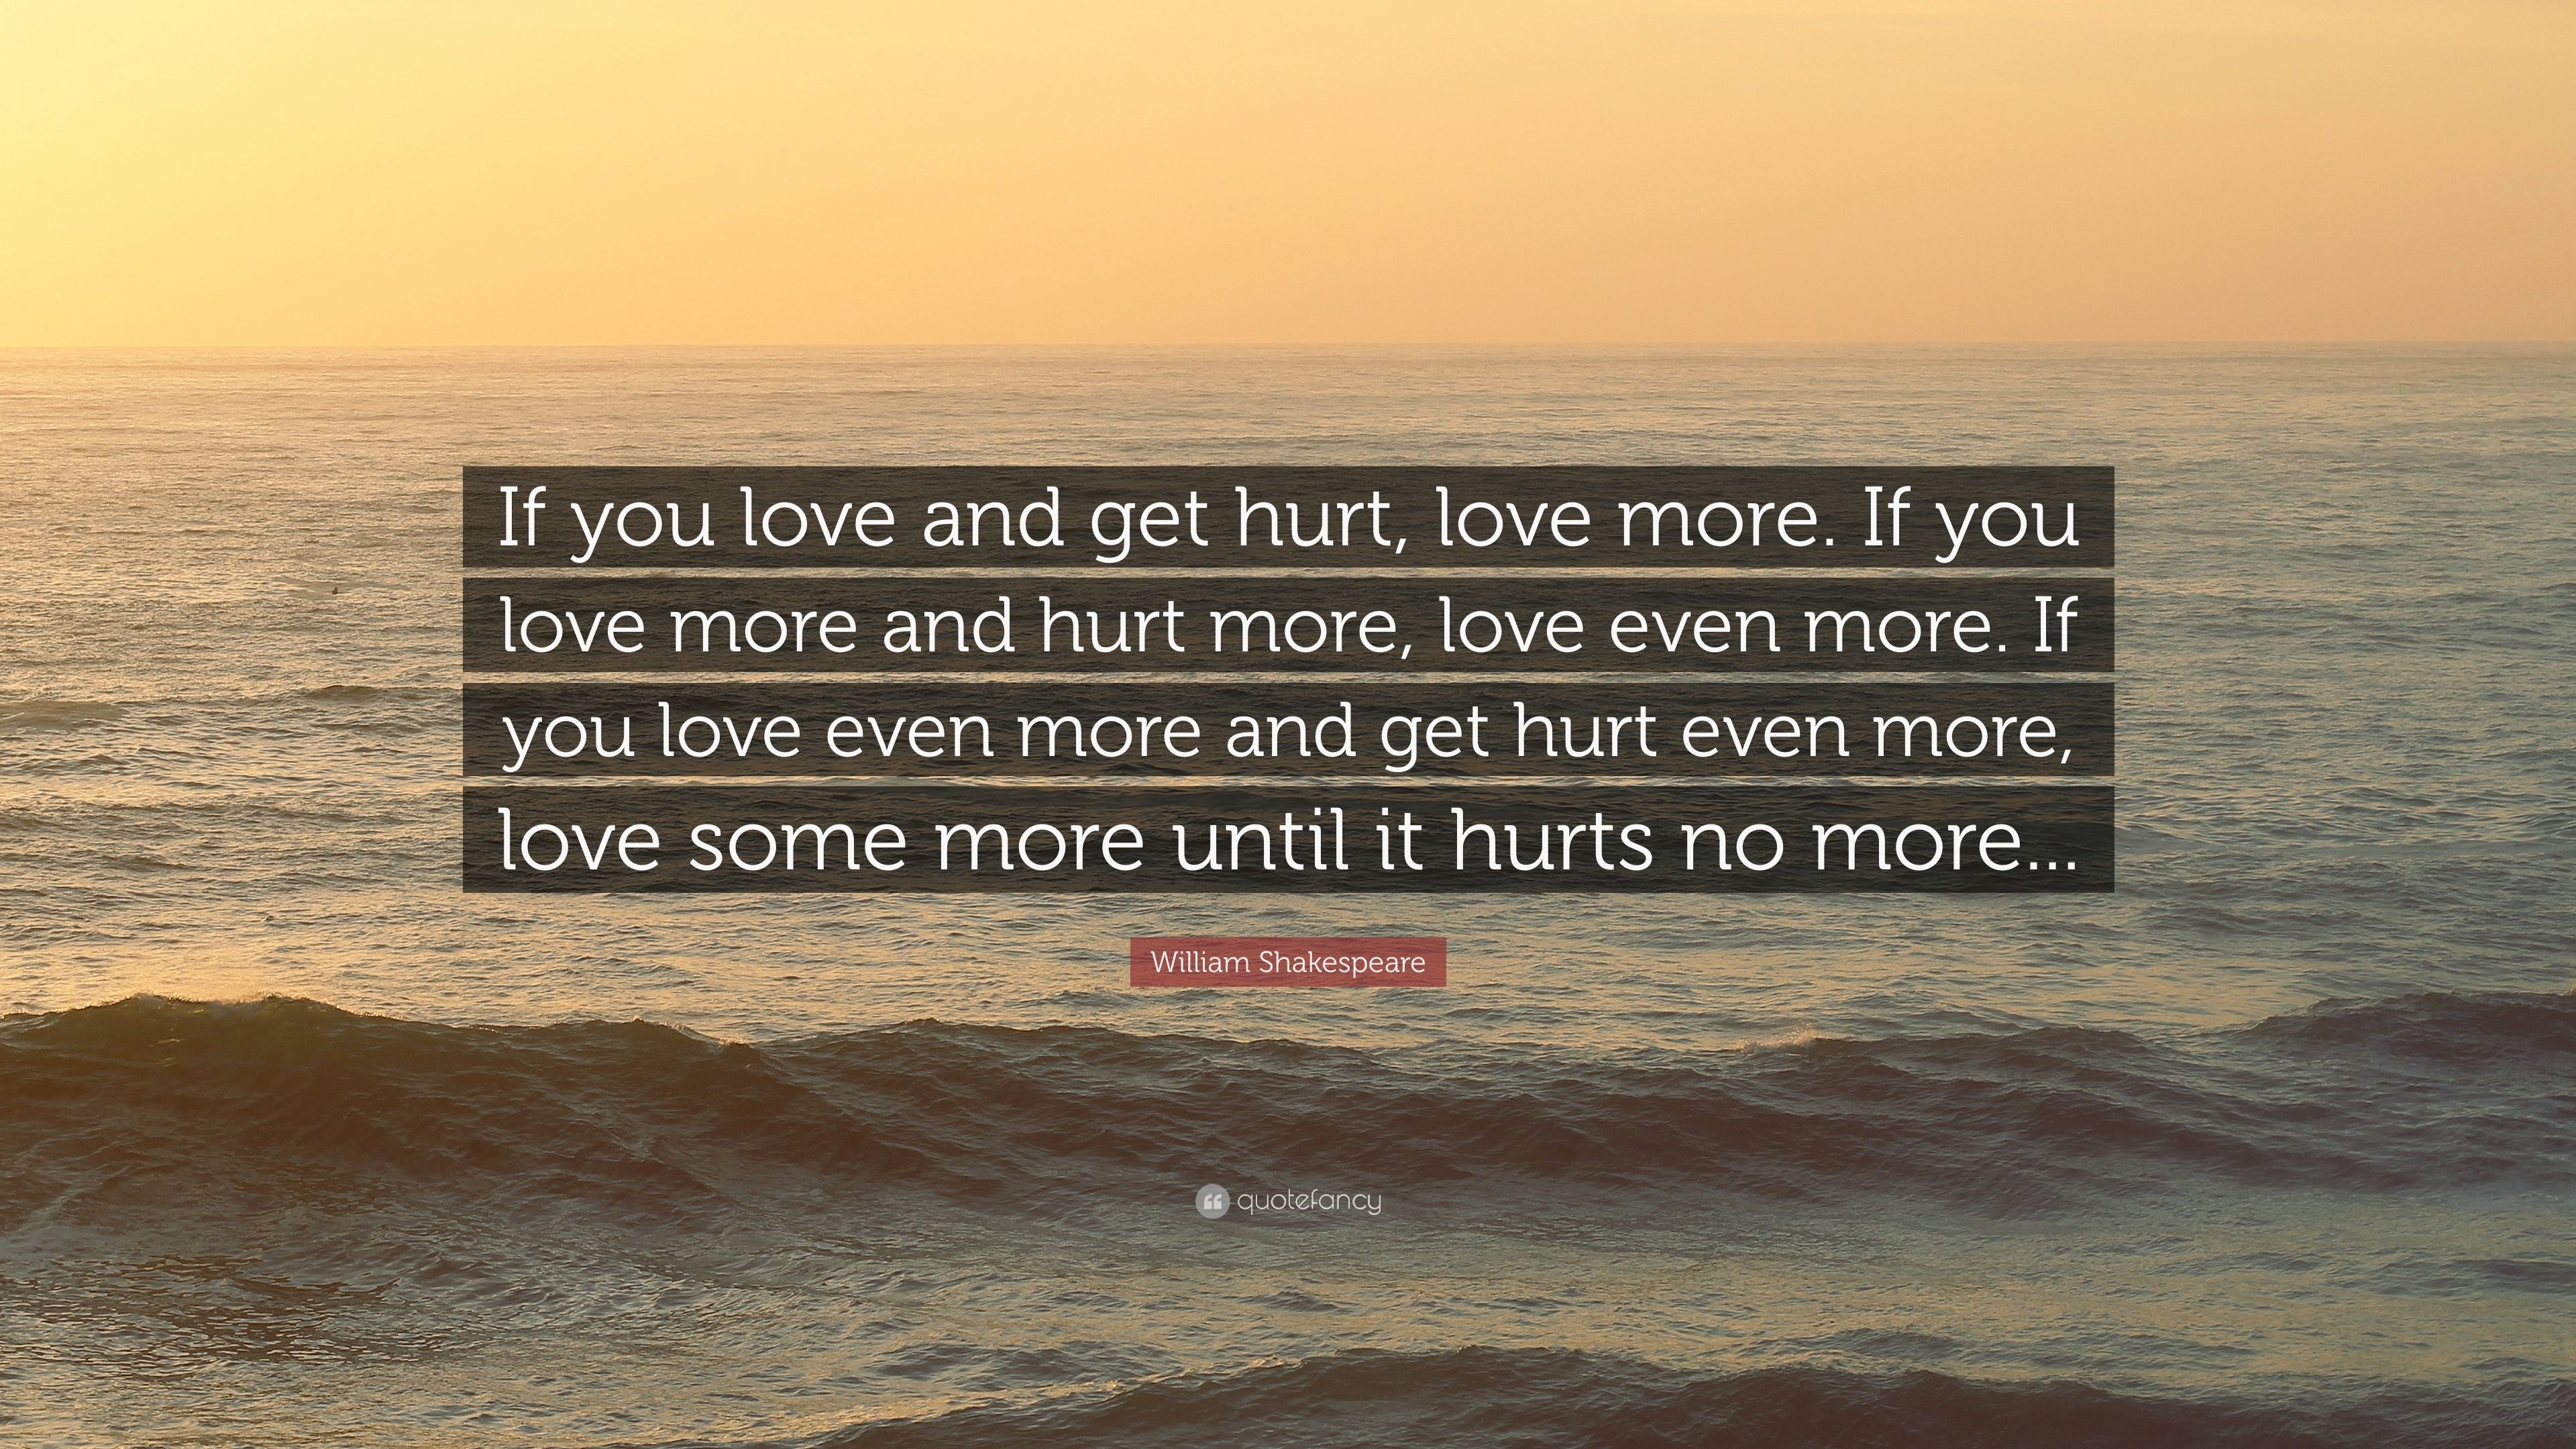 William Shakespeare Quote: “If you love and get hurt, love more. If